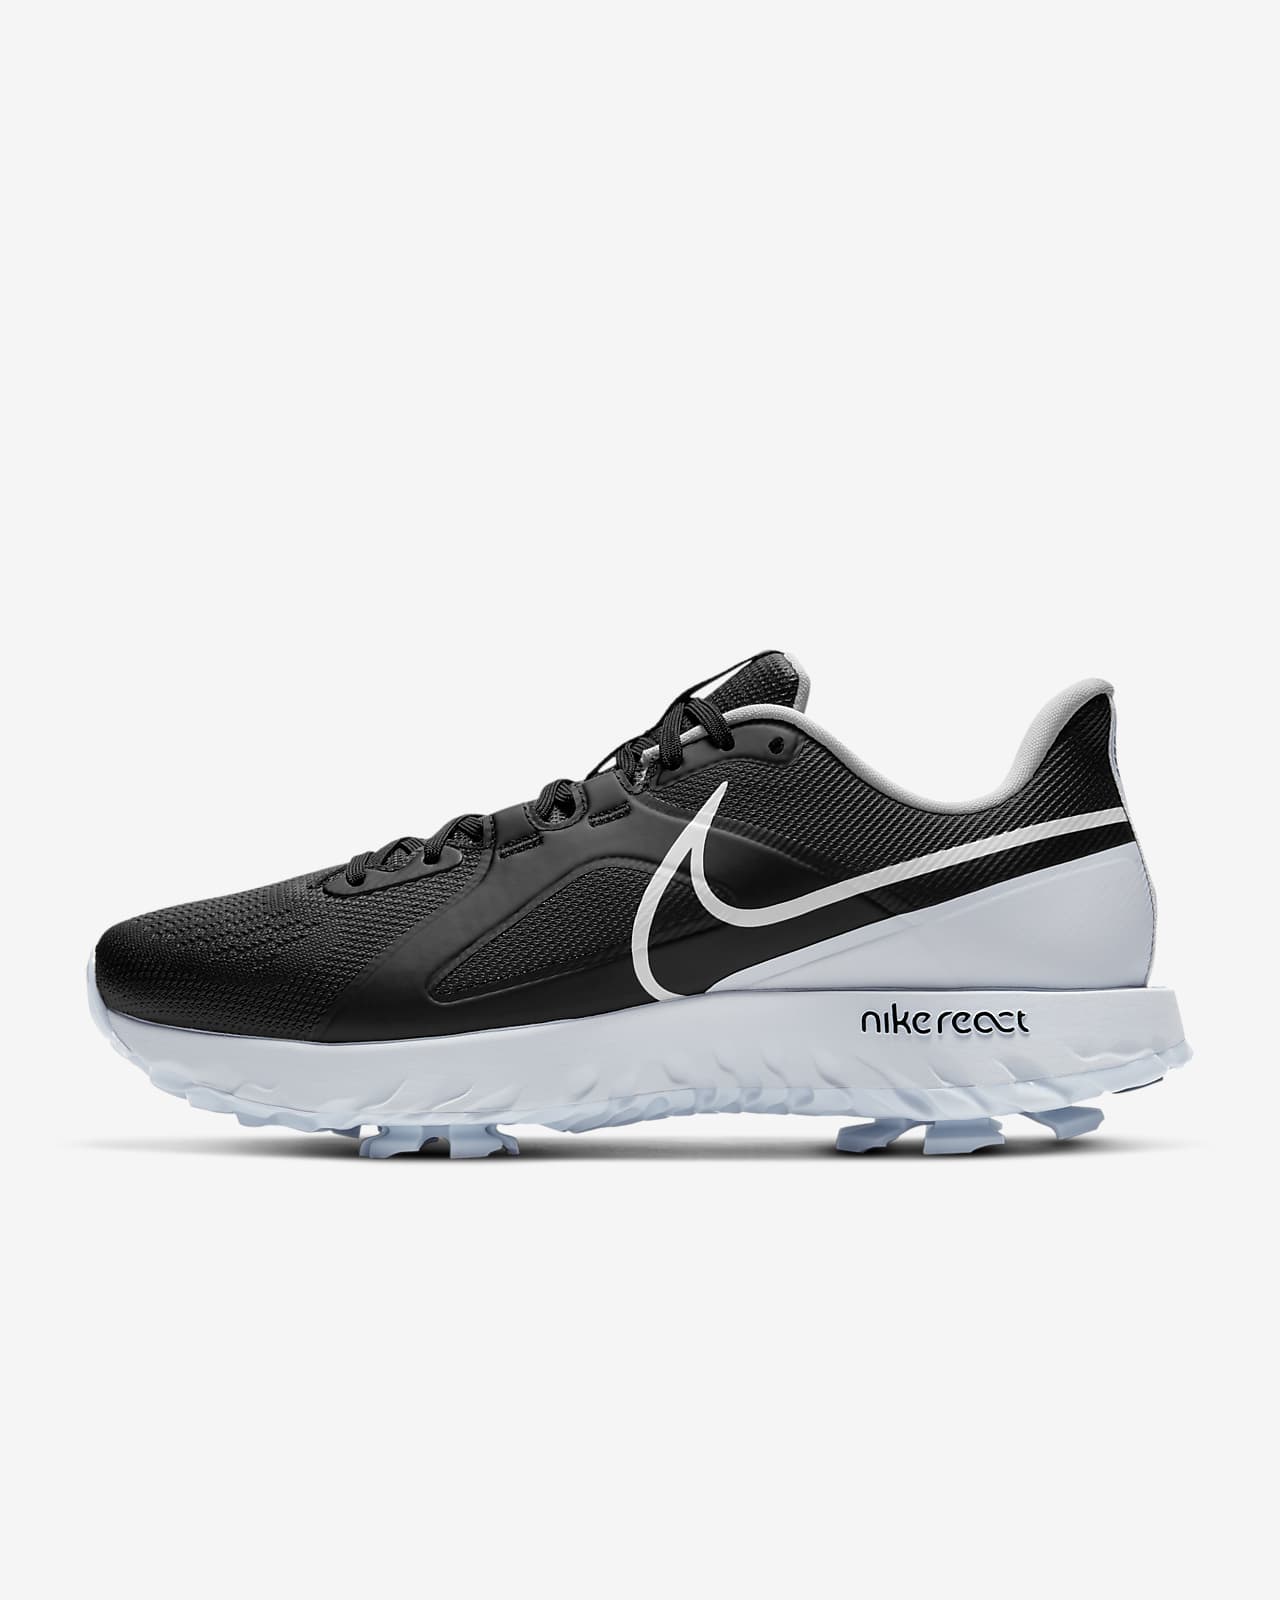 react golf shoes